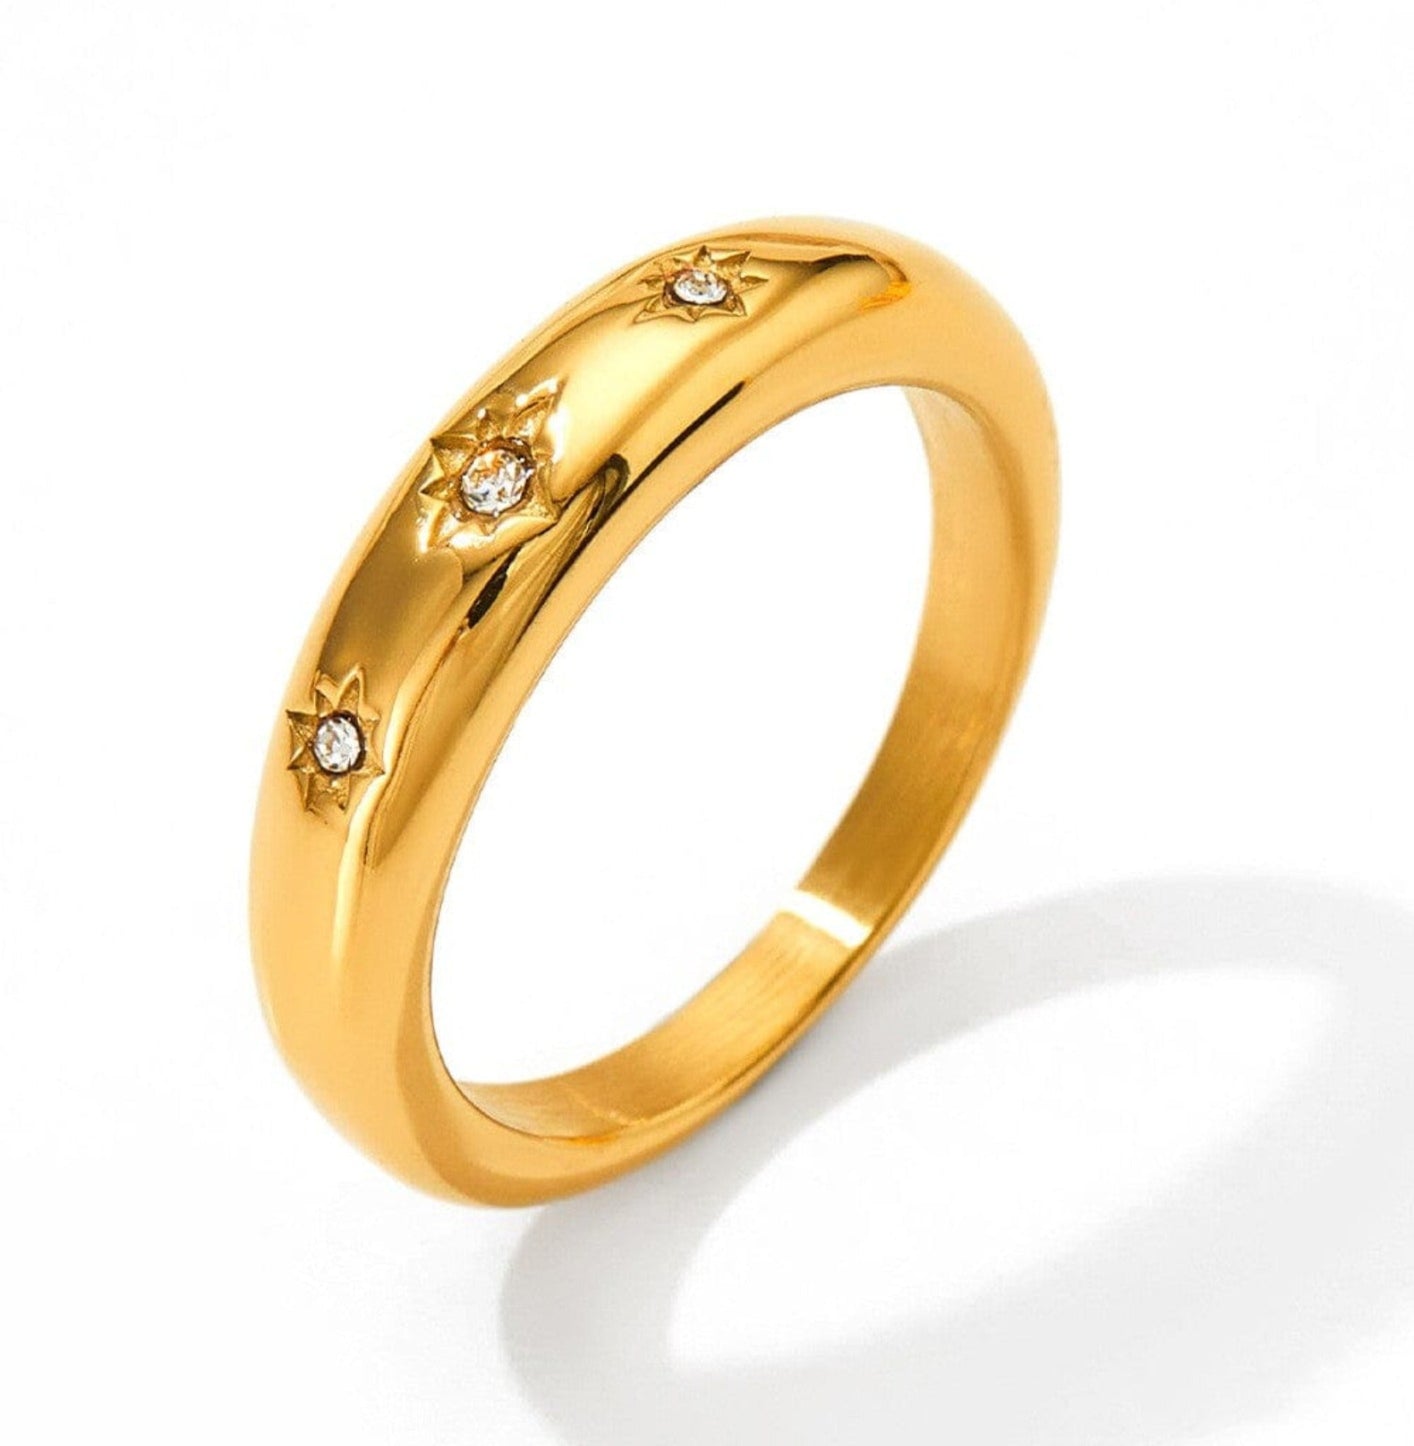 STAR DIAMOND RING ring Yubama Jewelry Online Store - The Elegant Designs of Gold and Silver ! Gold 6 